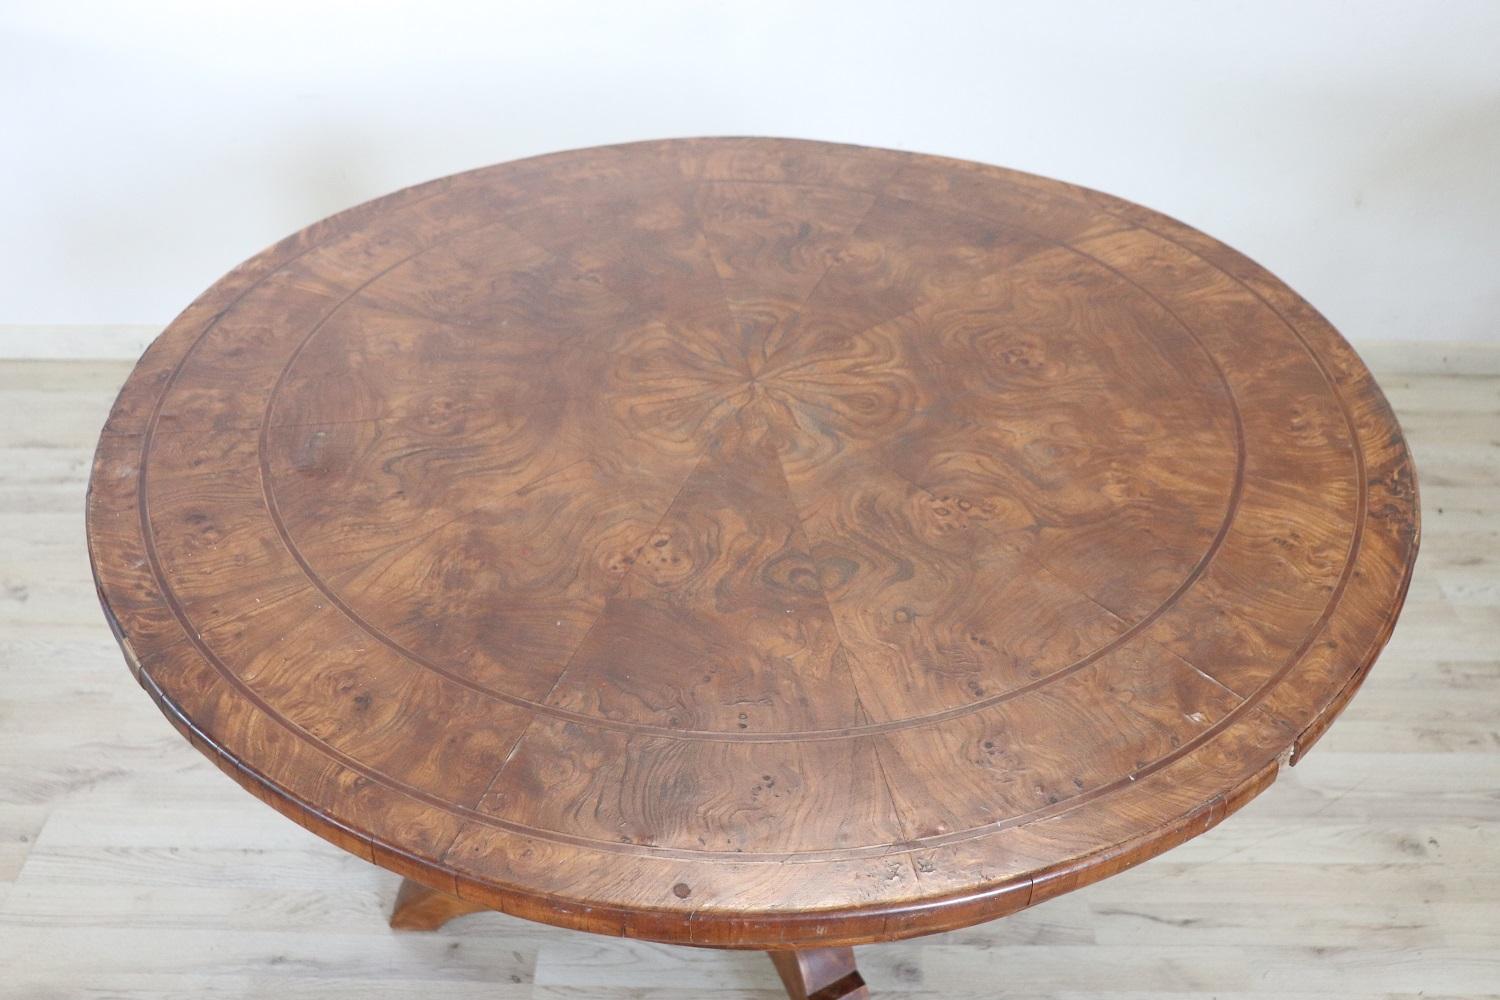 Beautiful important antique round table, 1825s. The large and solid central stem in turned walnut. The walnut briar top is of great value. This center table is perfect for a large entrance or to embellish a living room. Its dimensions are large so